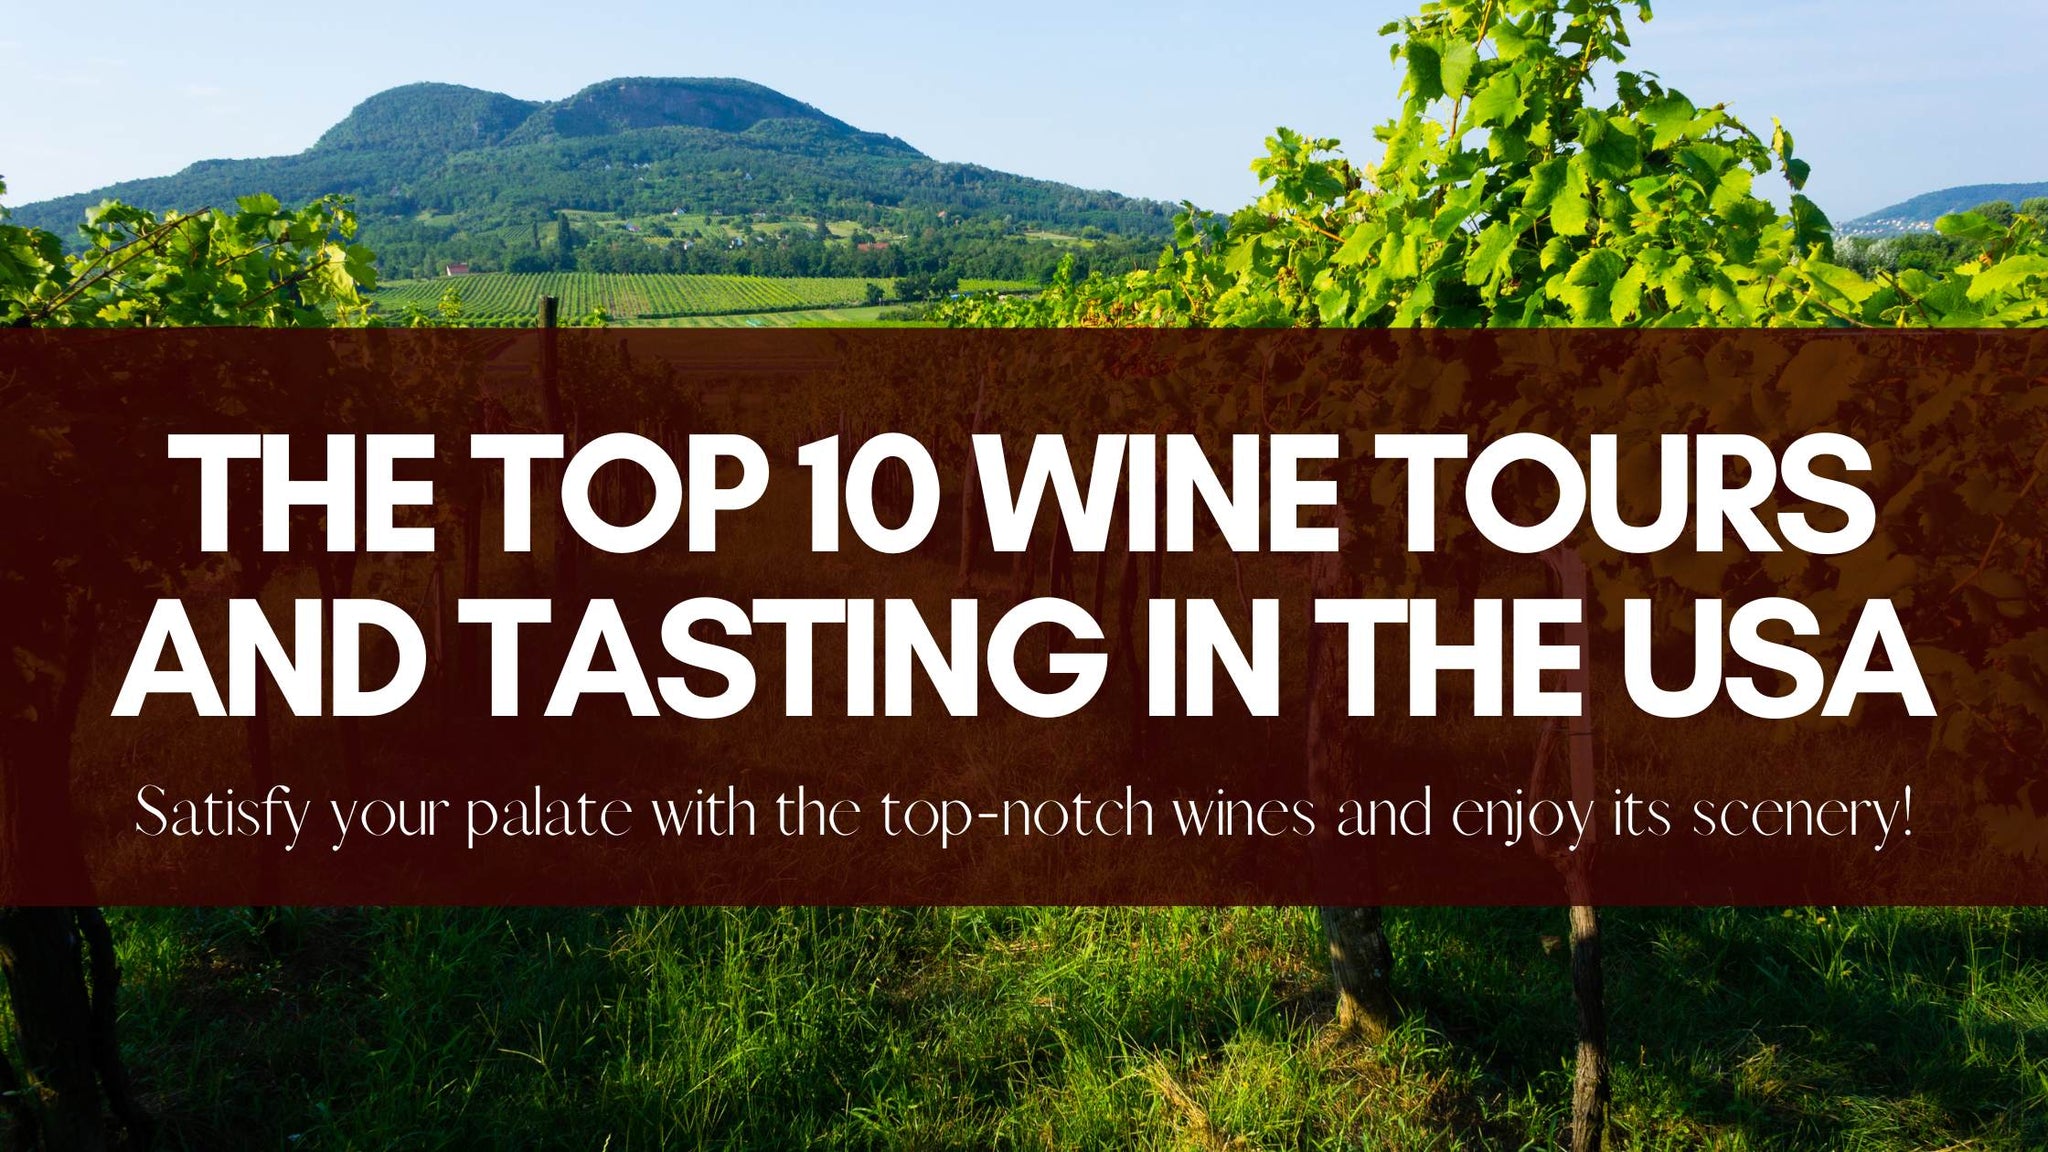 The Top 10 Wine Tours and Tasting in the USA